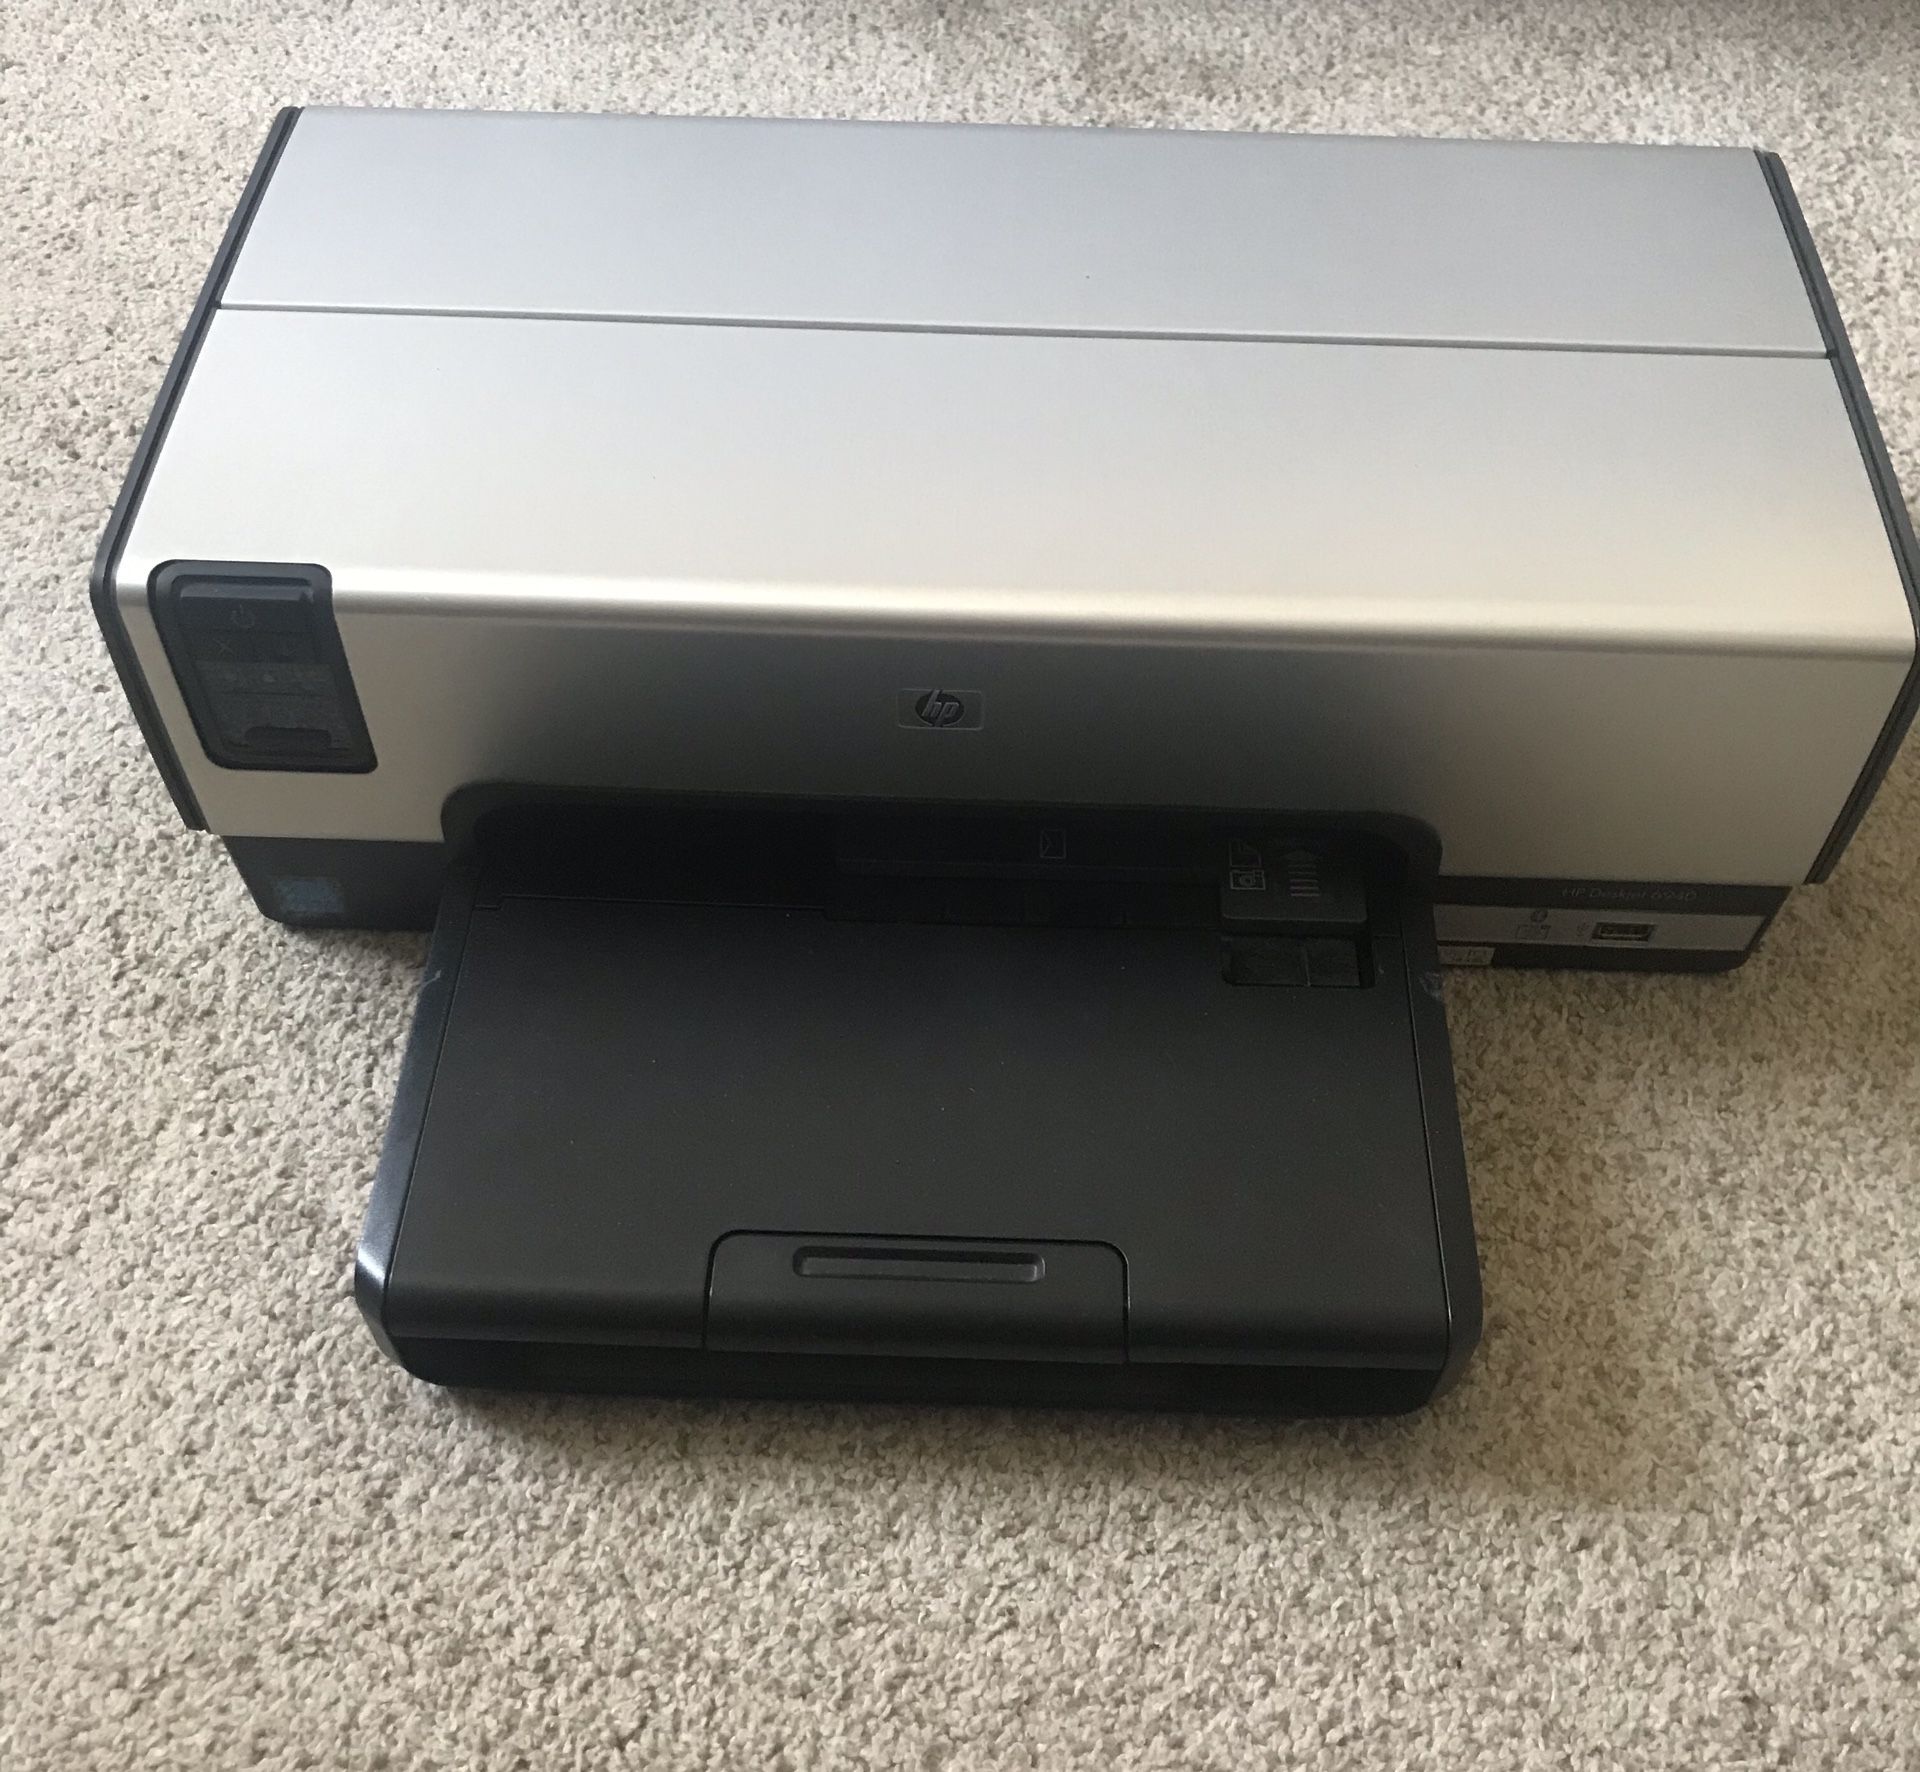 HP Deskjet 6940 Color Printer with Ink and all Cords and Documents